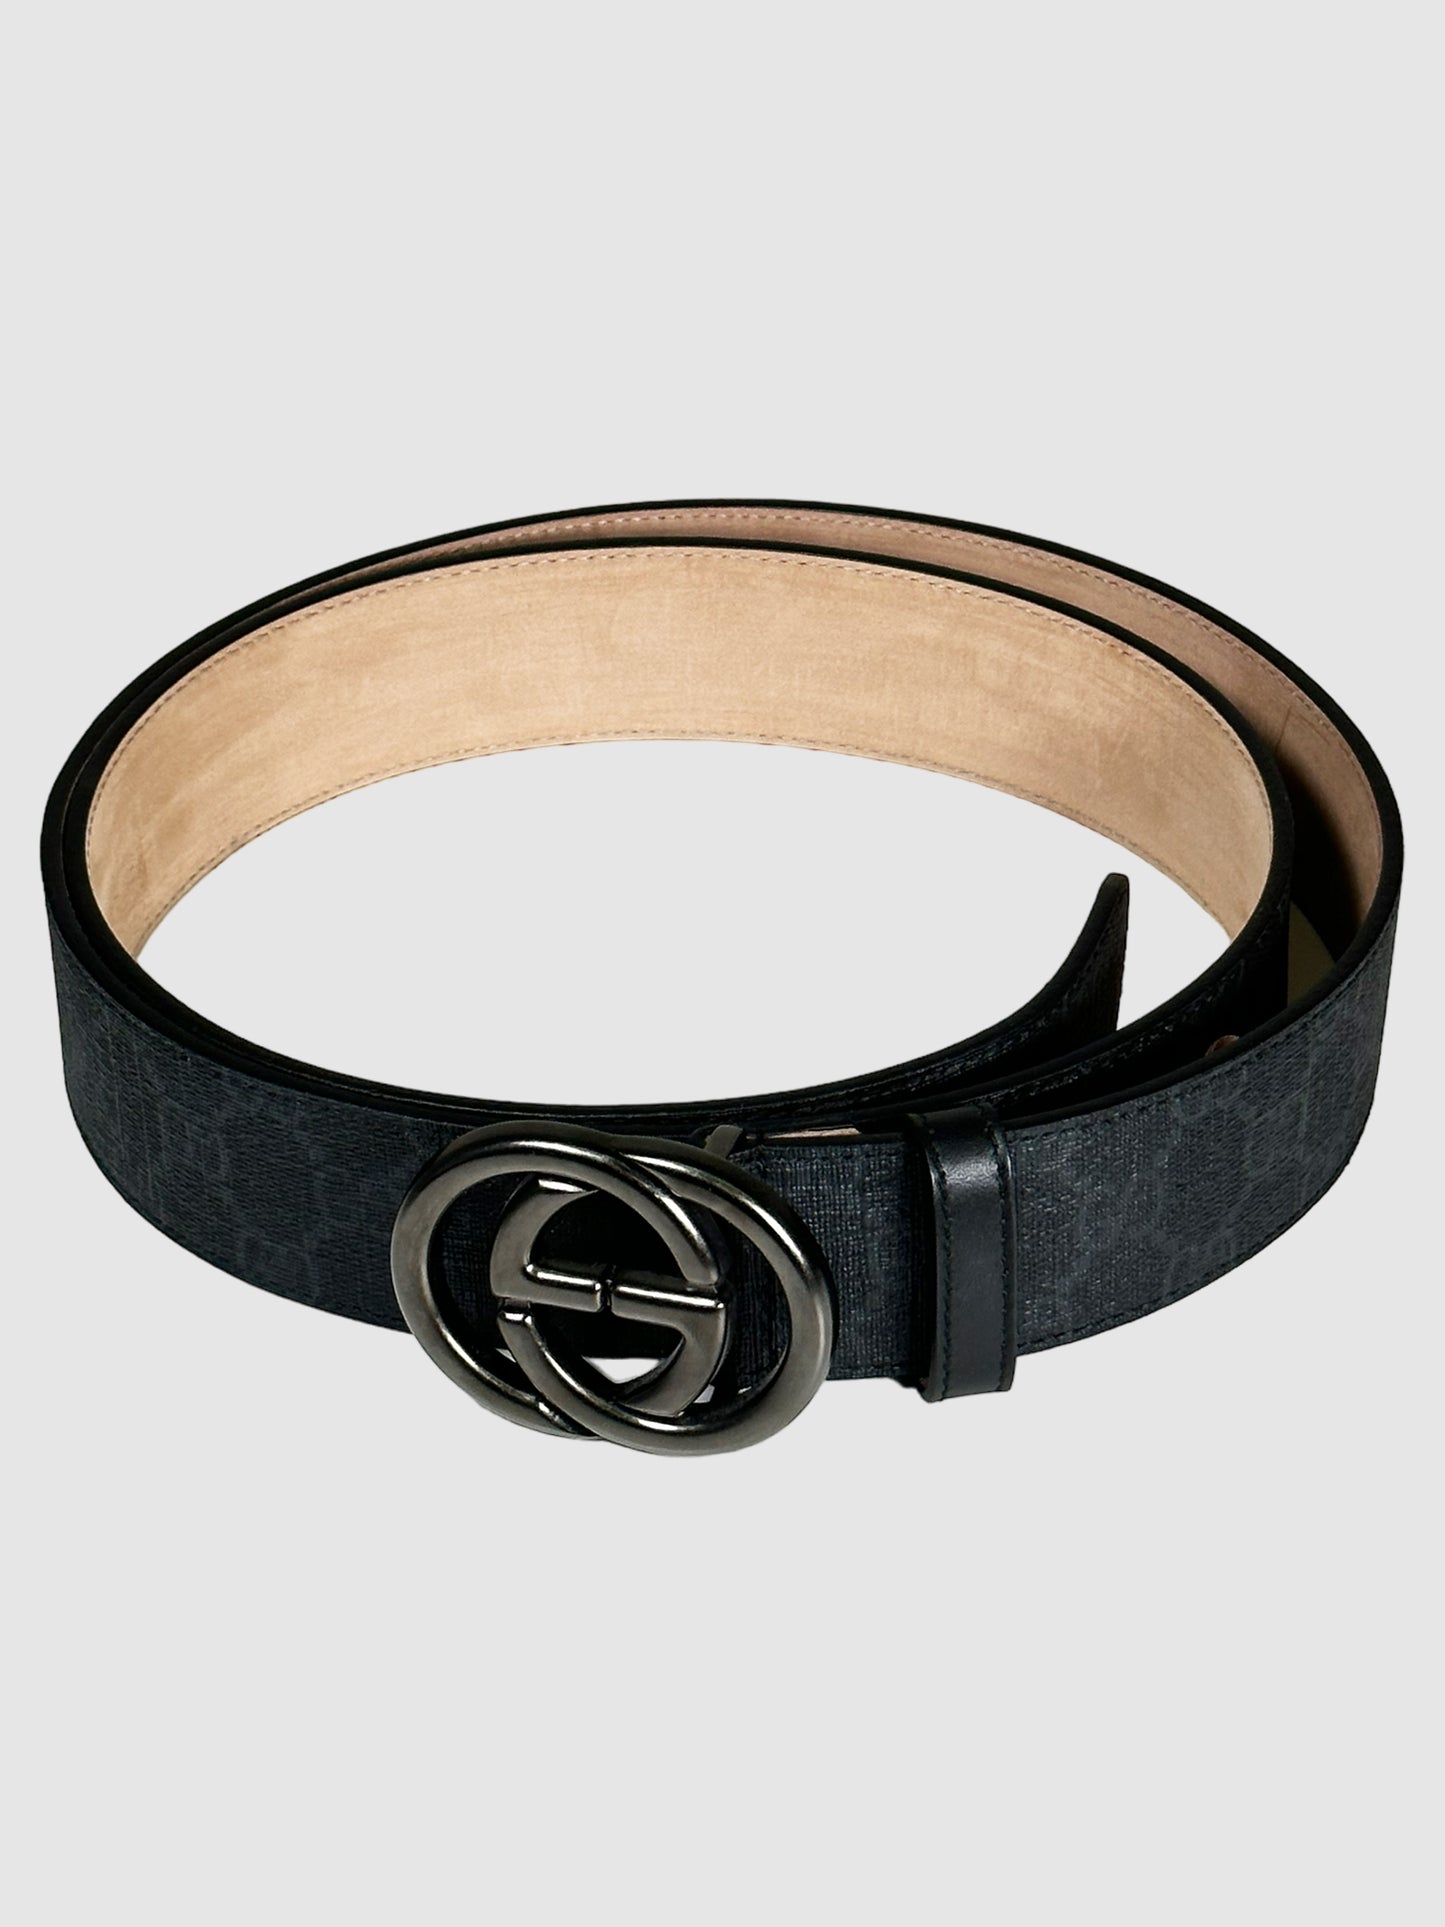 GG Canvas Leather Belt - Size 46